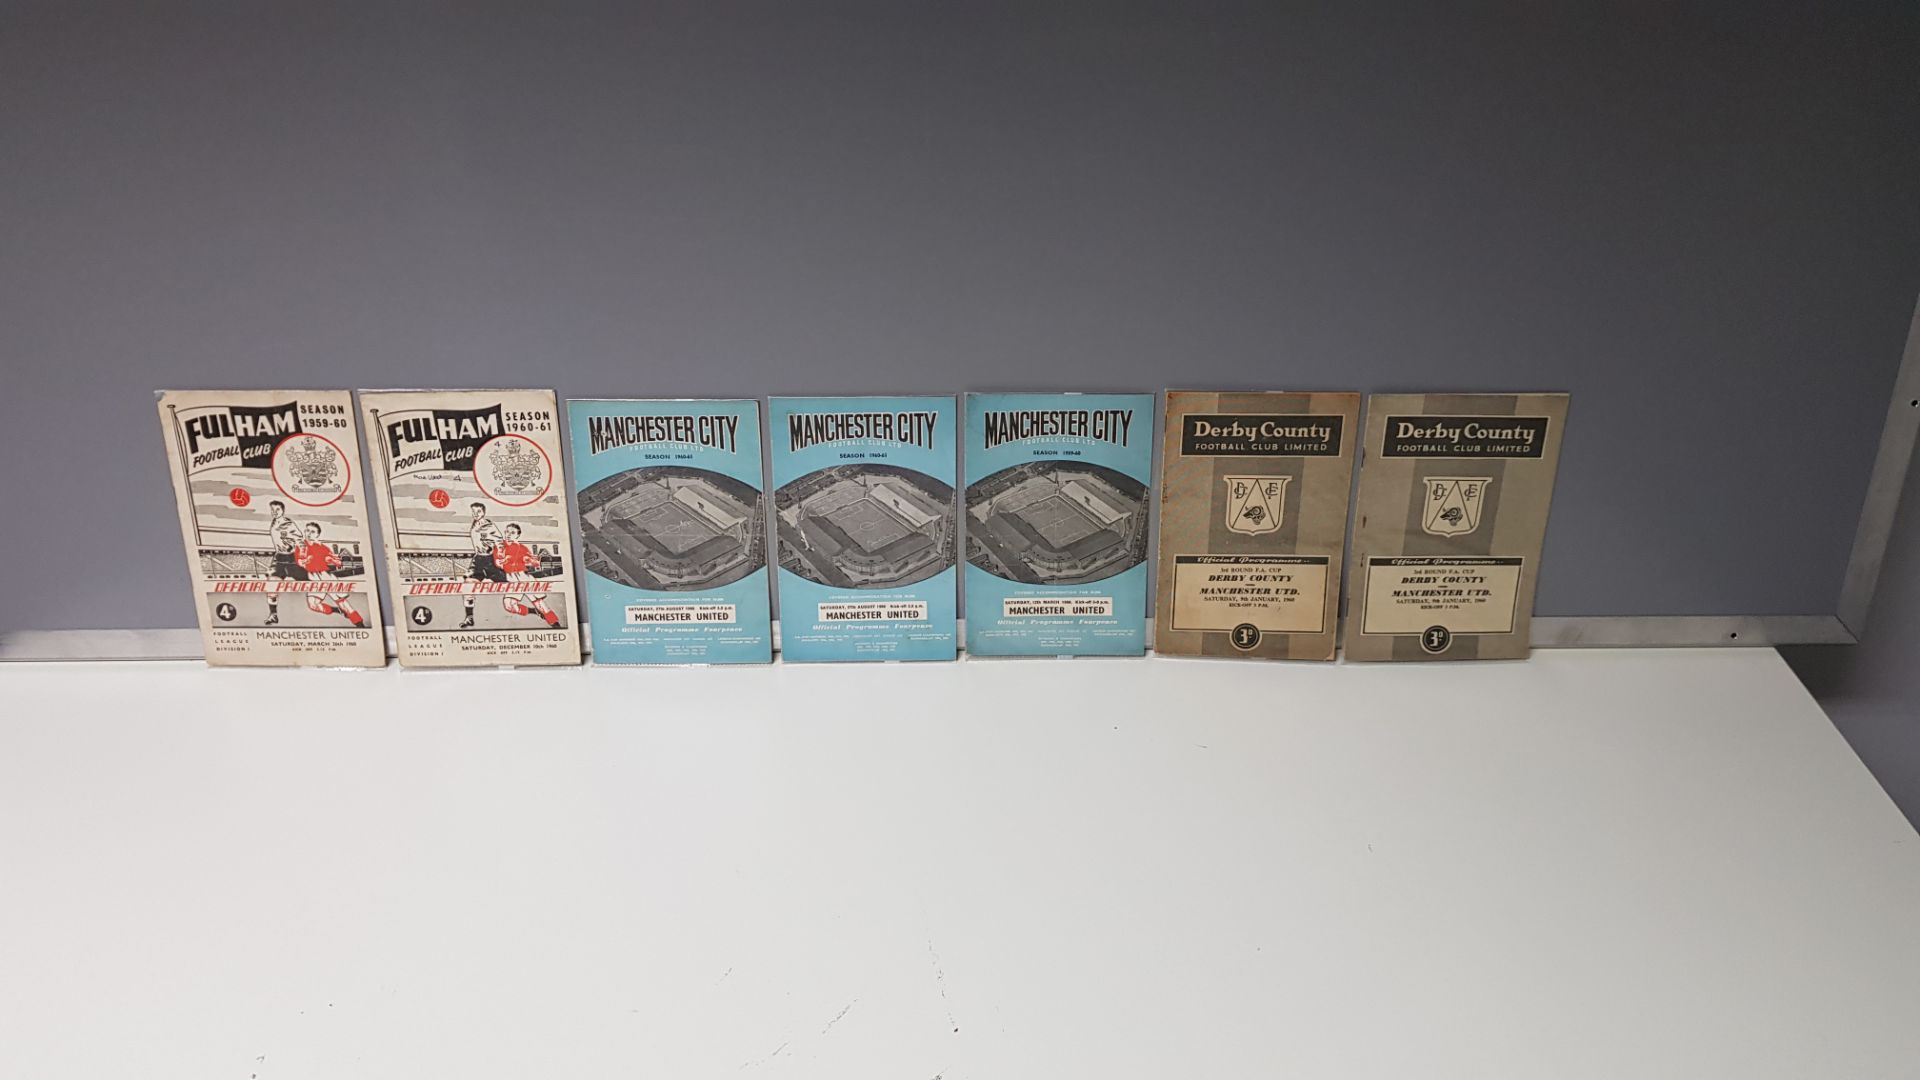 7 X MANCHESTER UNITED AWAY PROGRAMMES FROM THE 1960 SEASON TO INCLUDE - 2 X DERBY COUNTY, 3 X